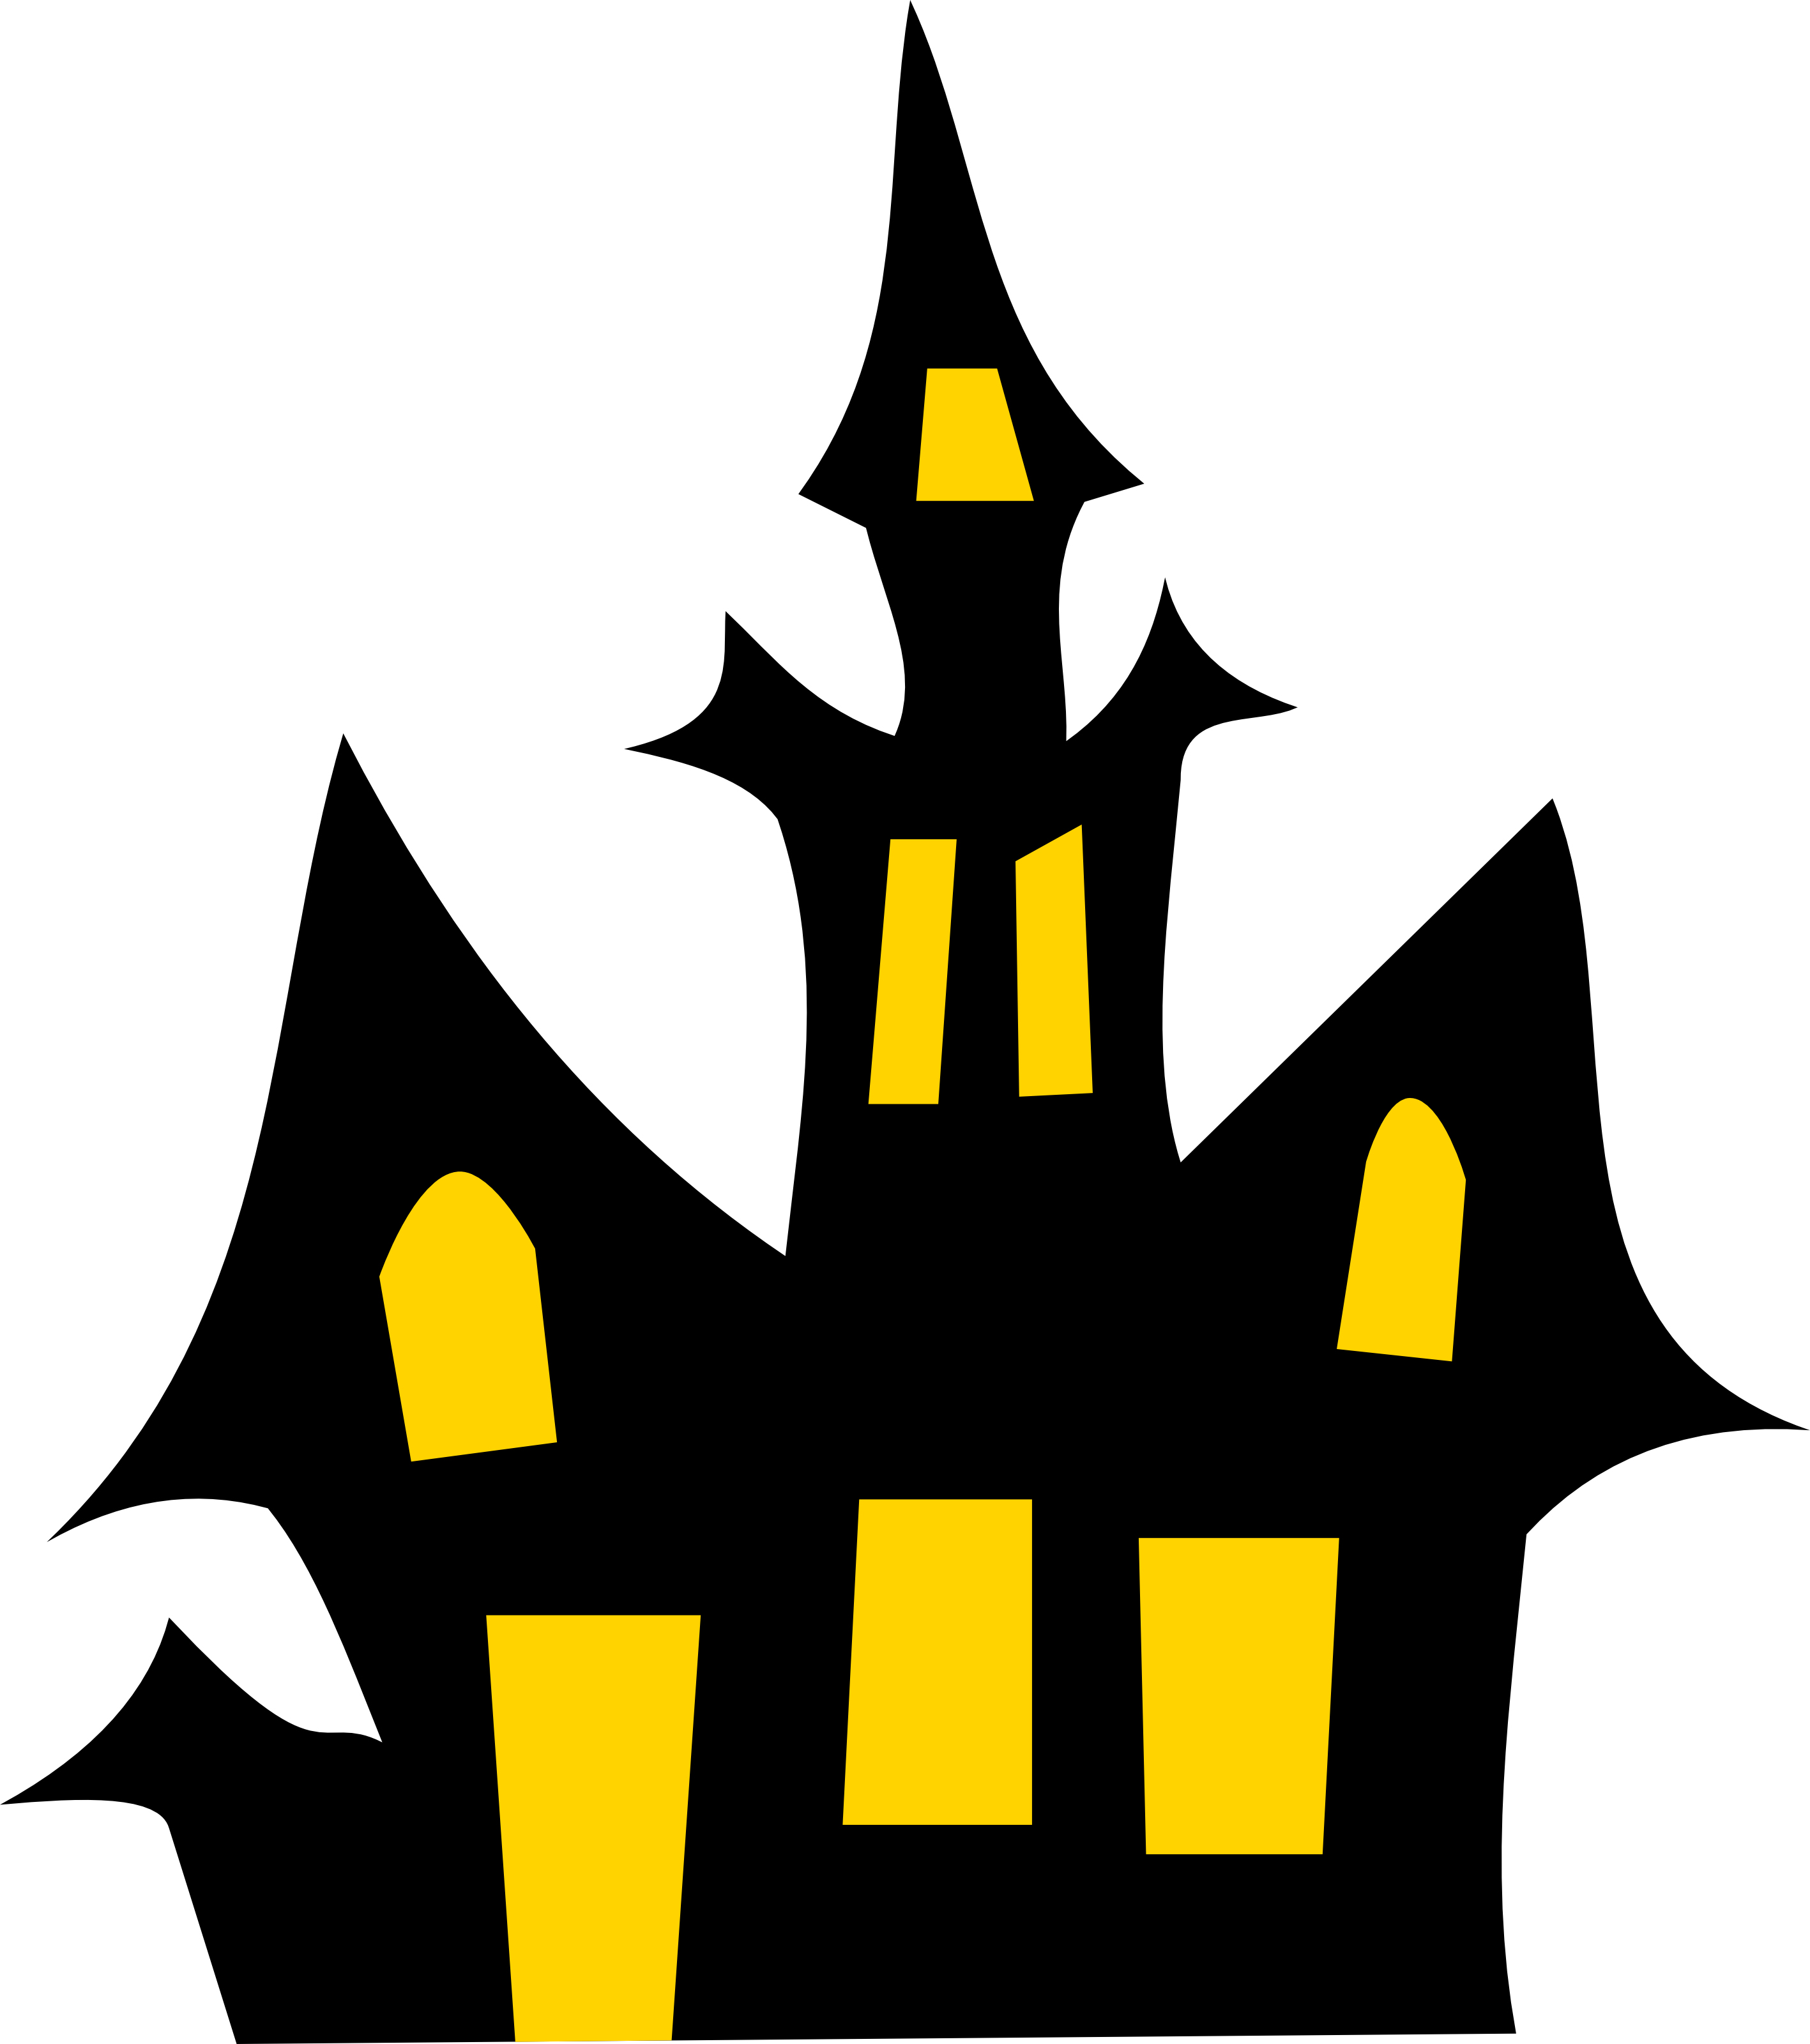 Halloween Clip Art Free Halloween Clip Art | Clipart library - Free 